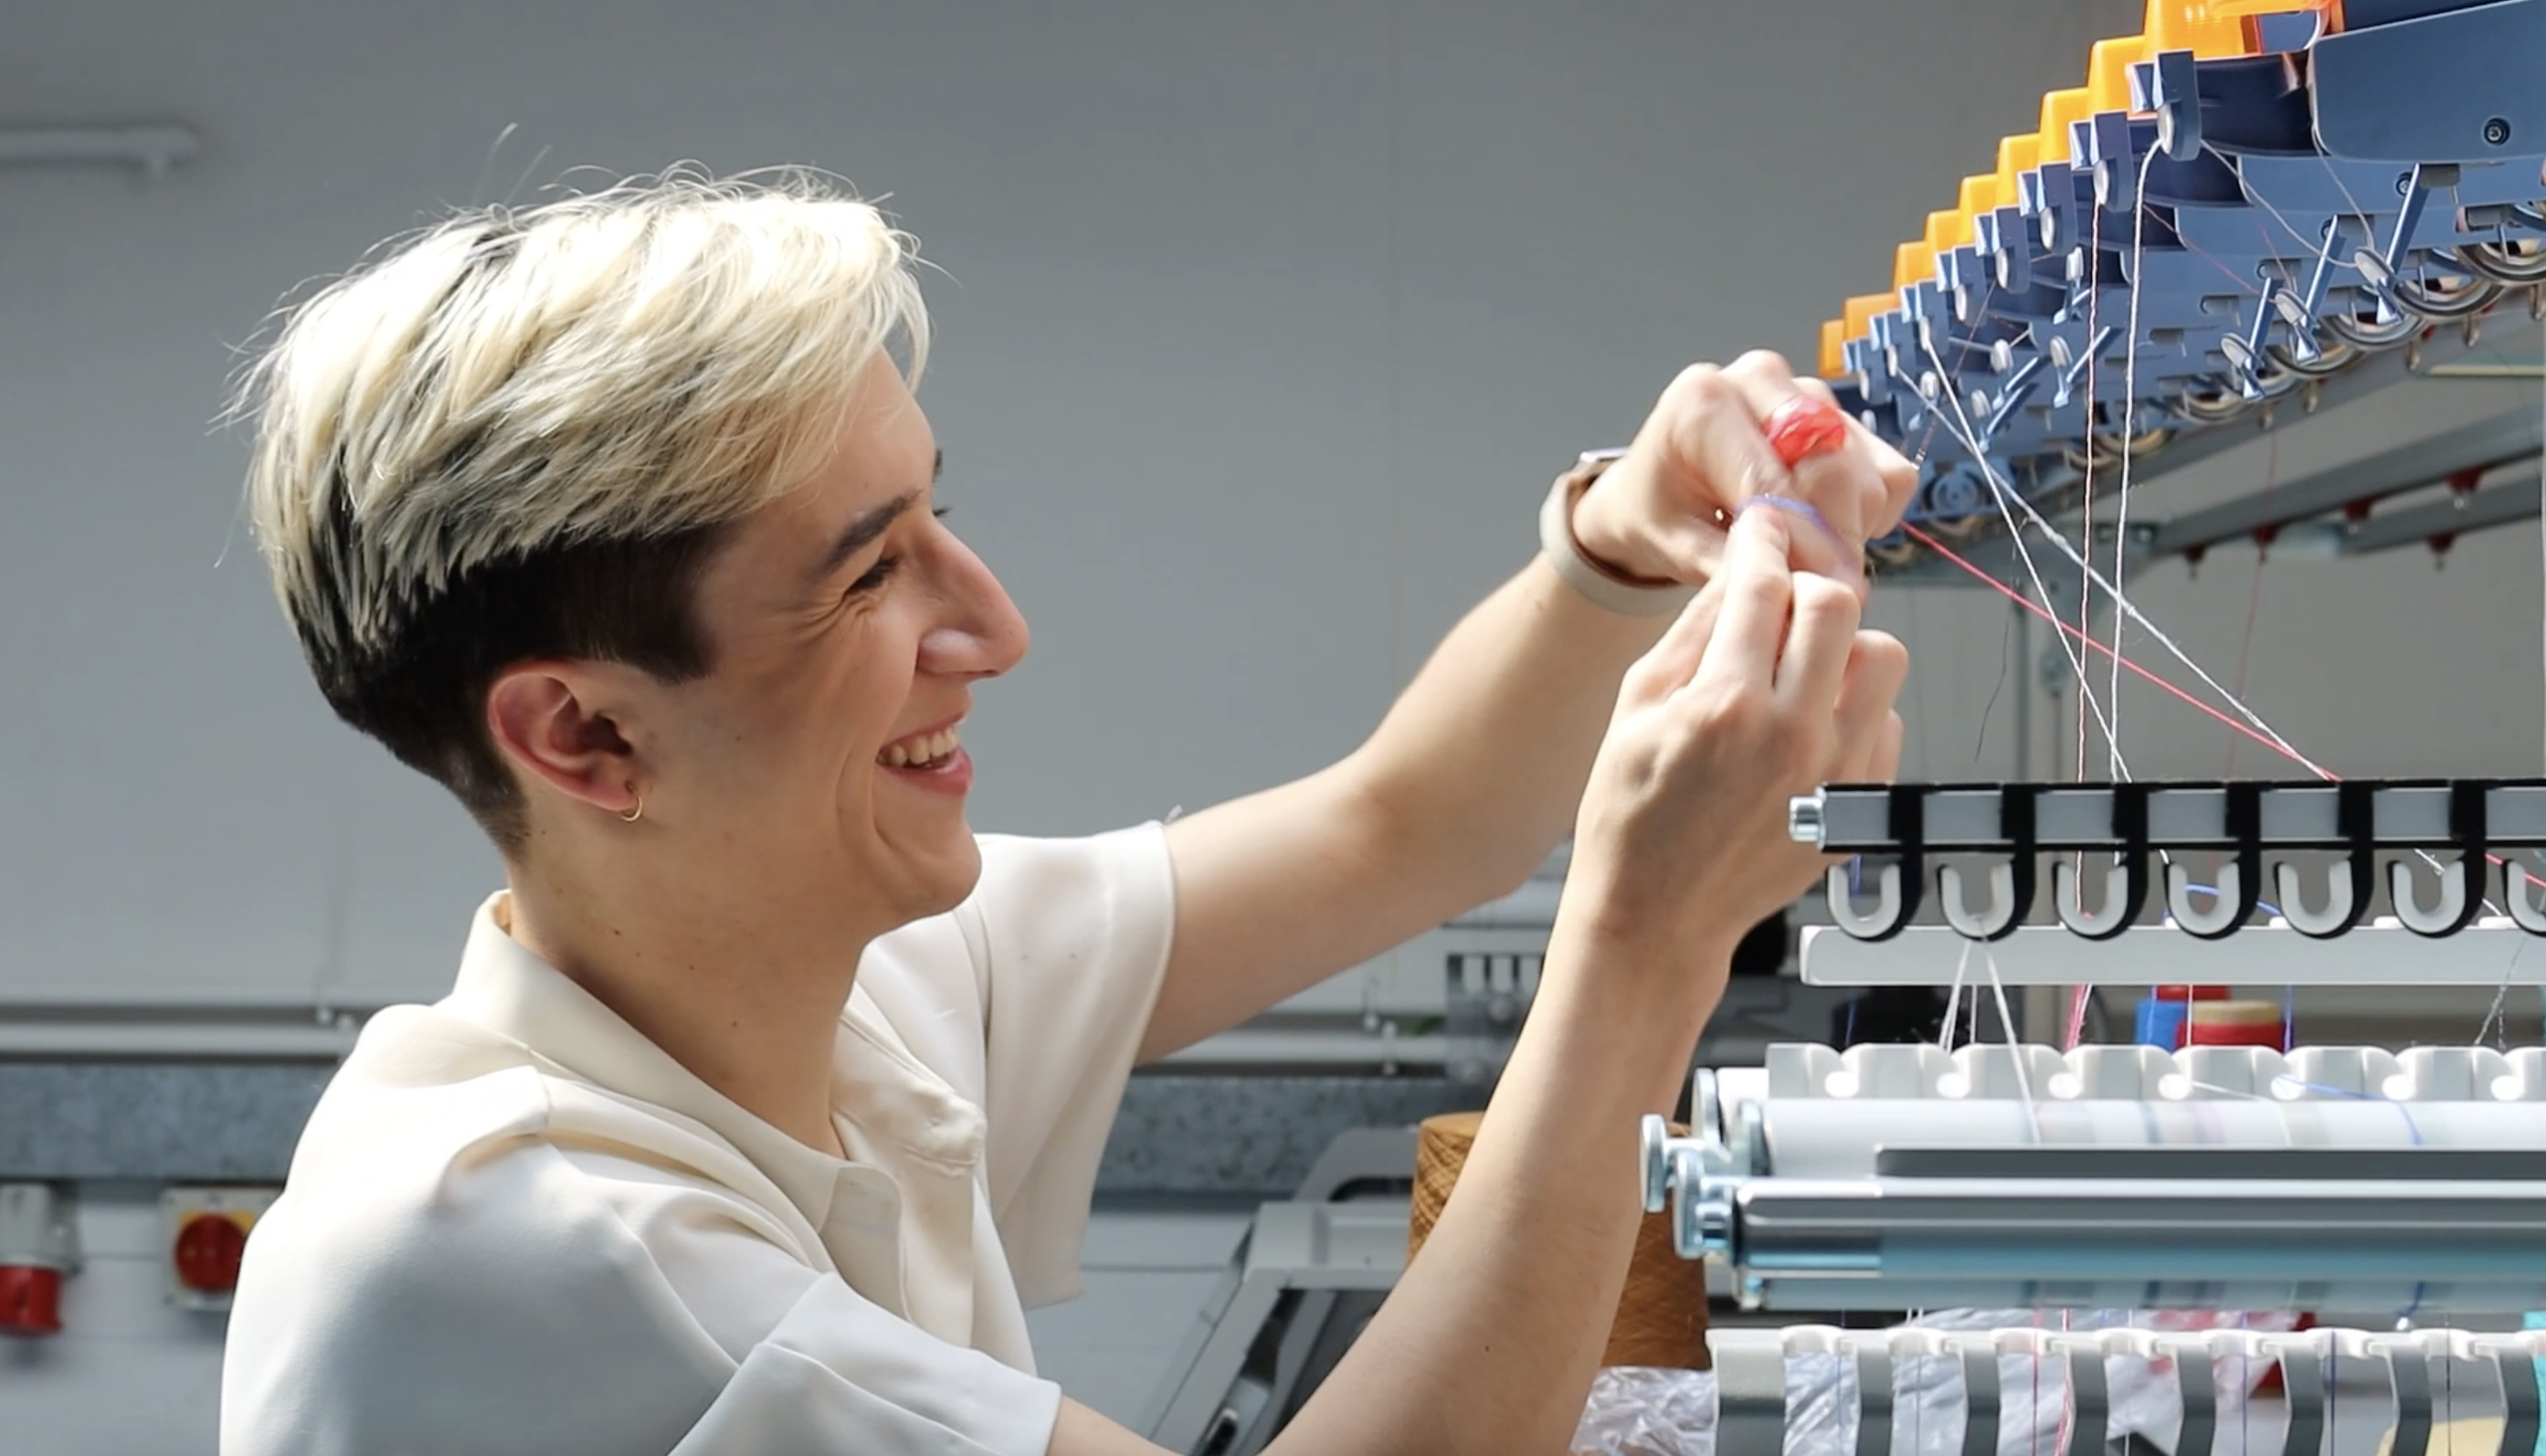 A picture of someone threading a knitting machine while smiling